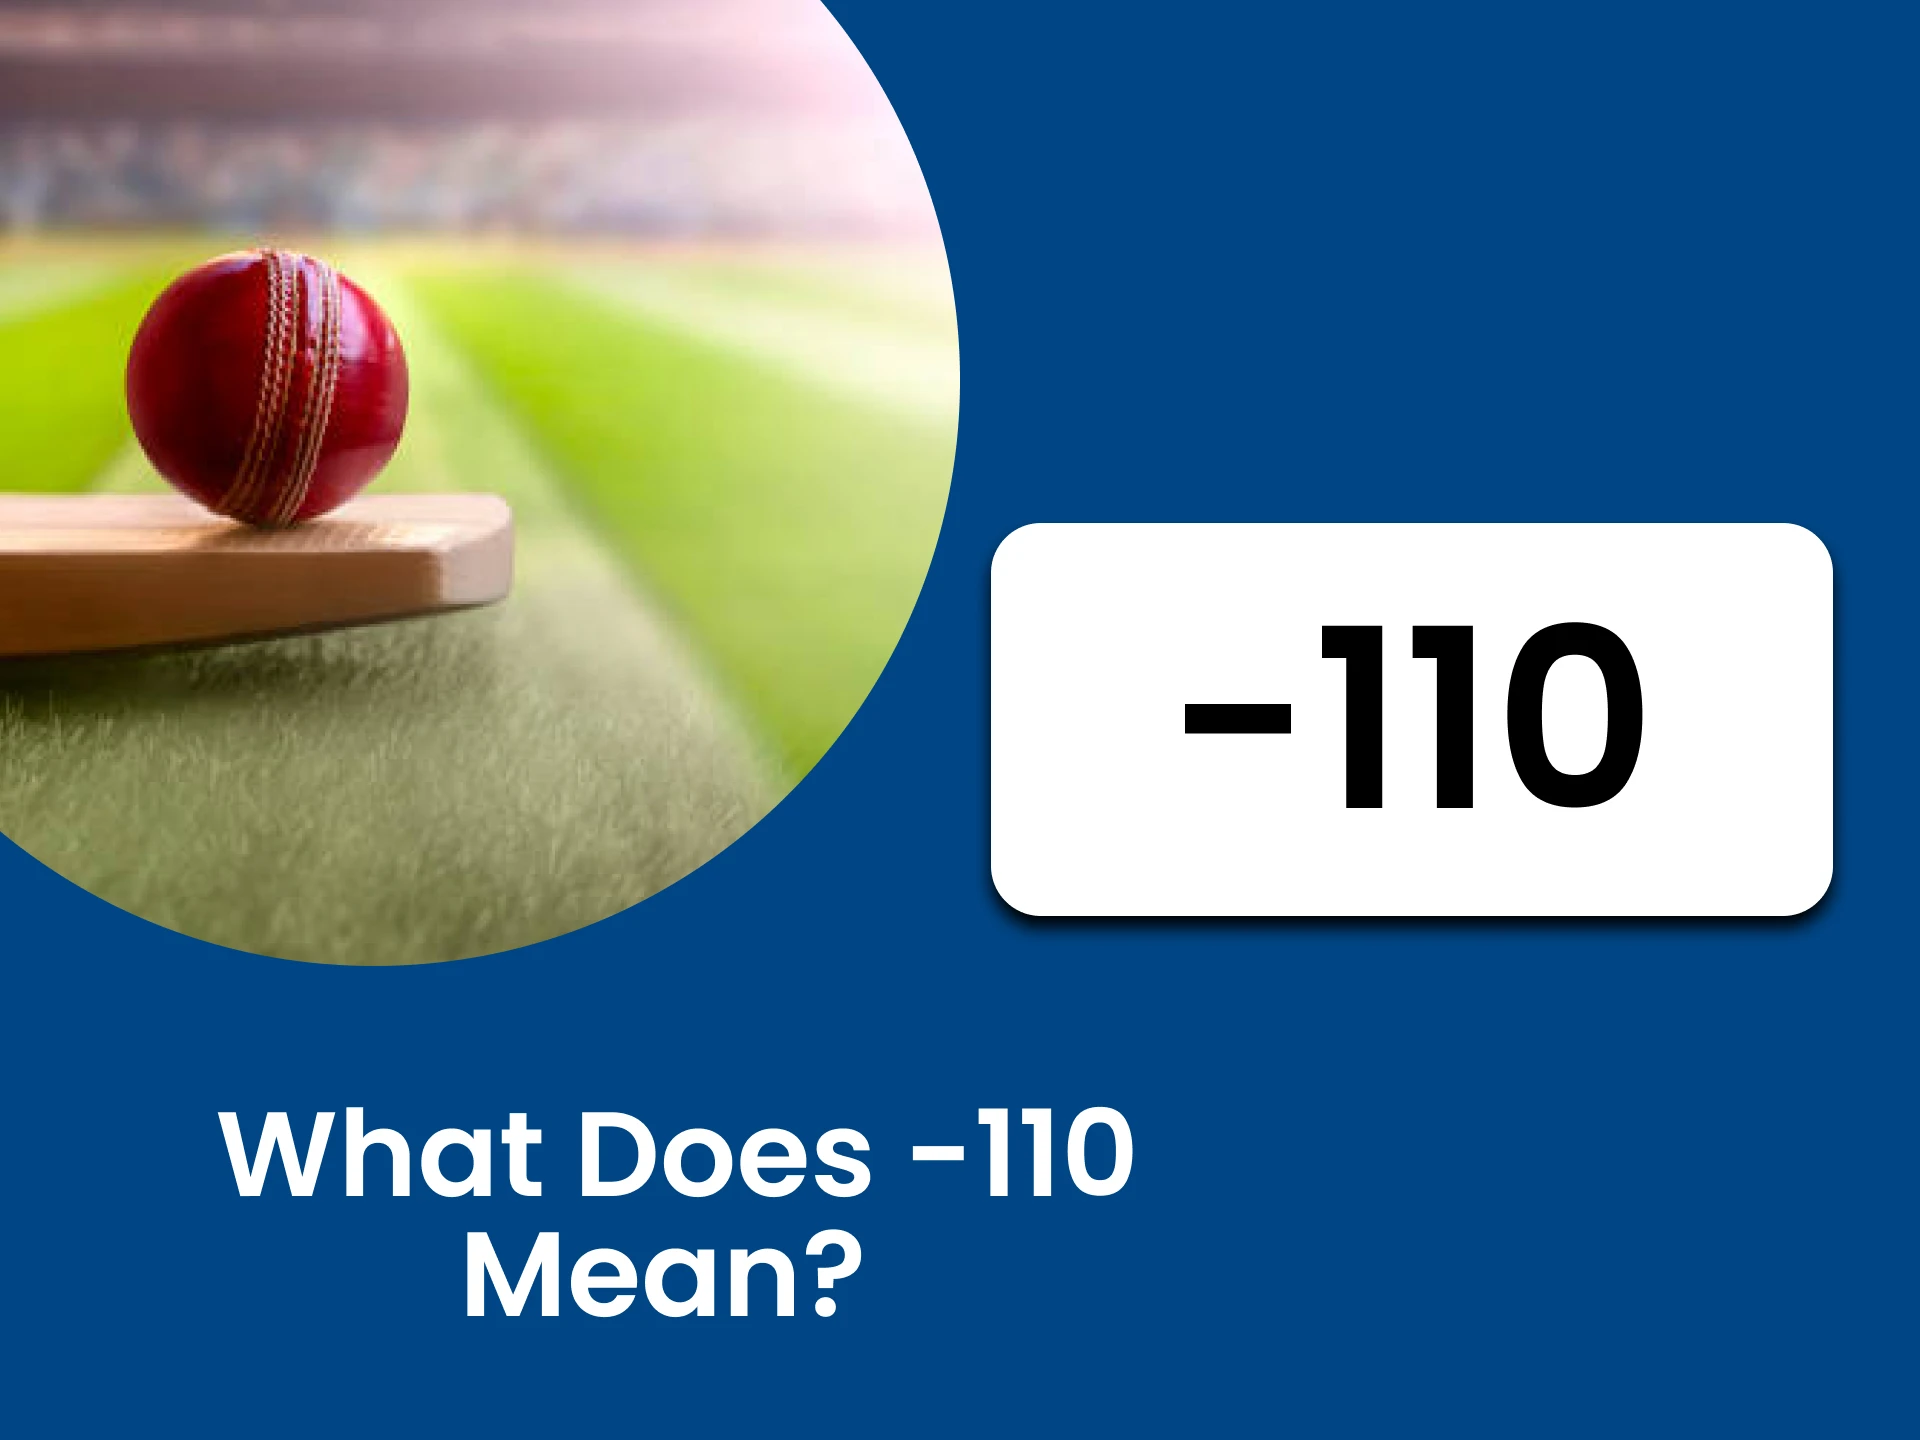 We will tell you what 110 means in sports betting.